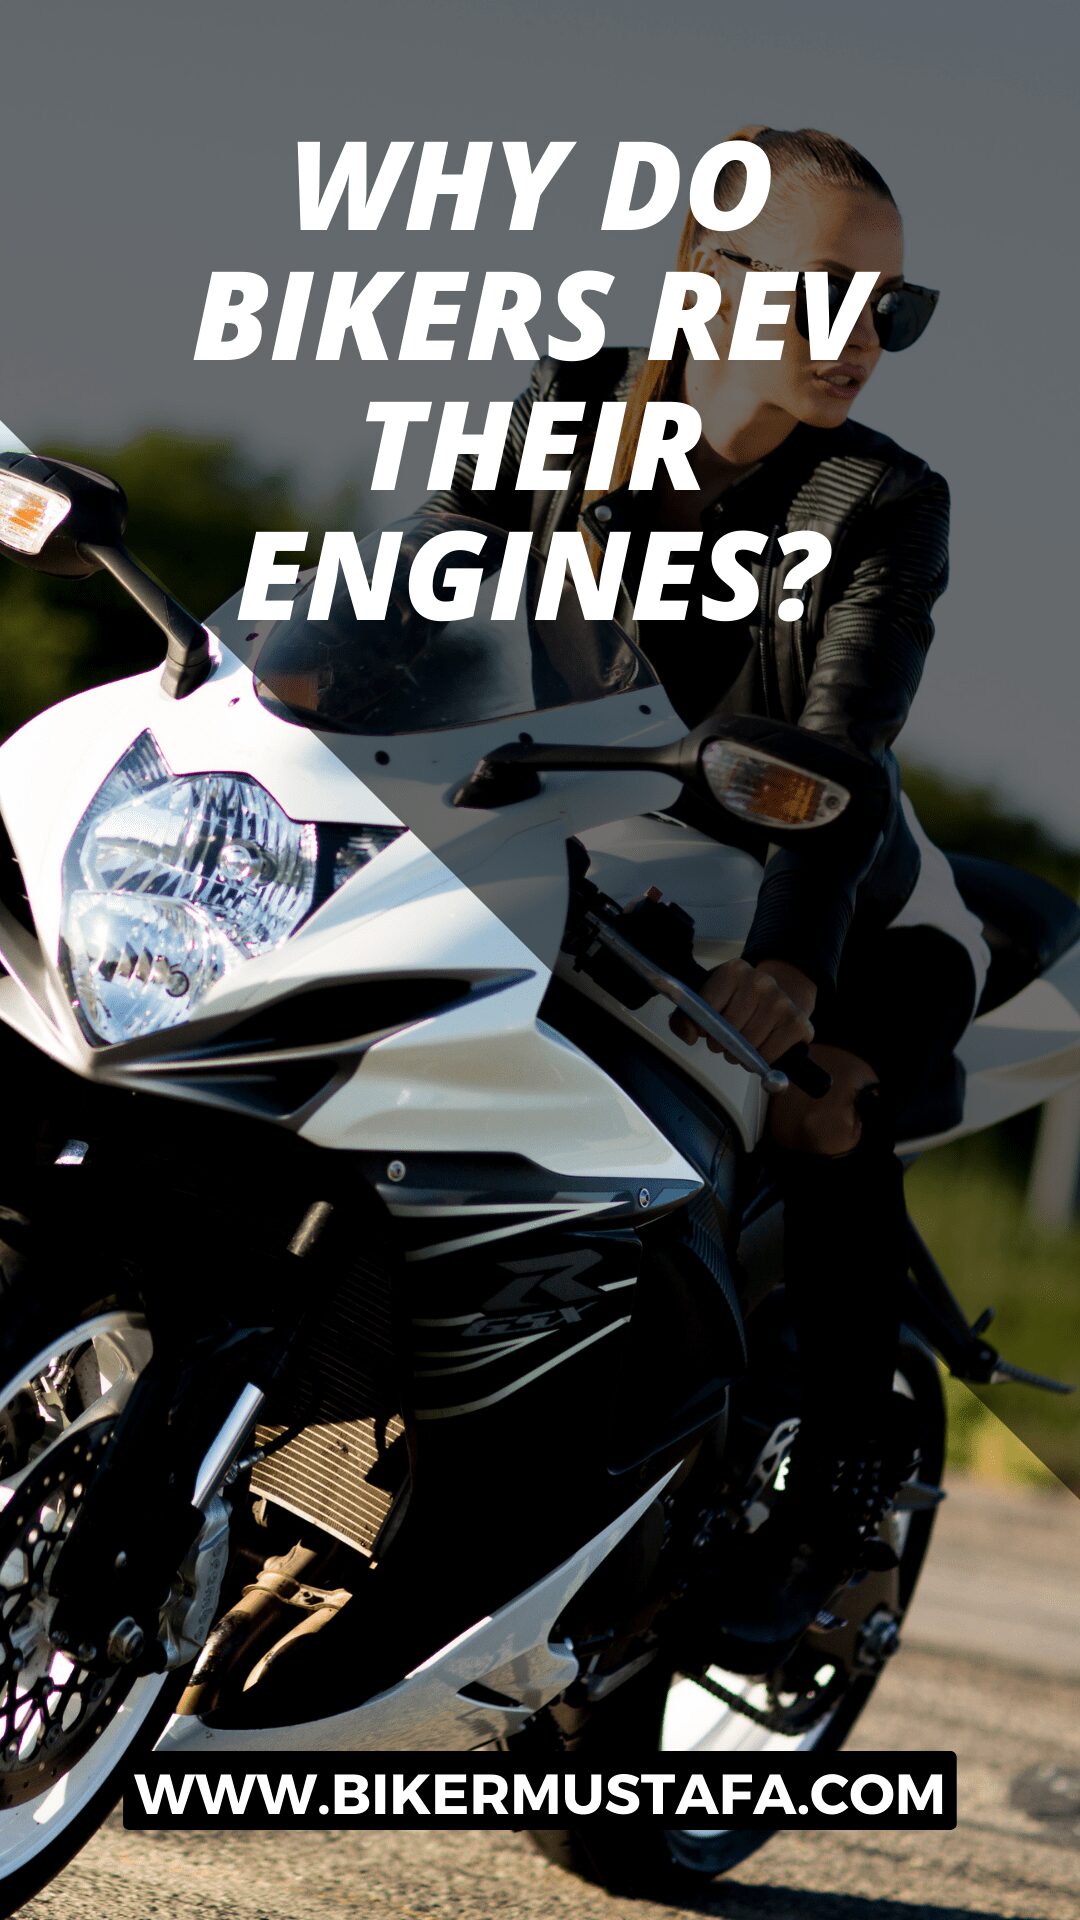 Why Do Bikers Rev Their Engines?